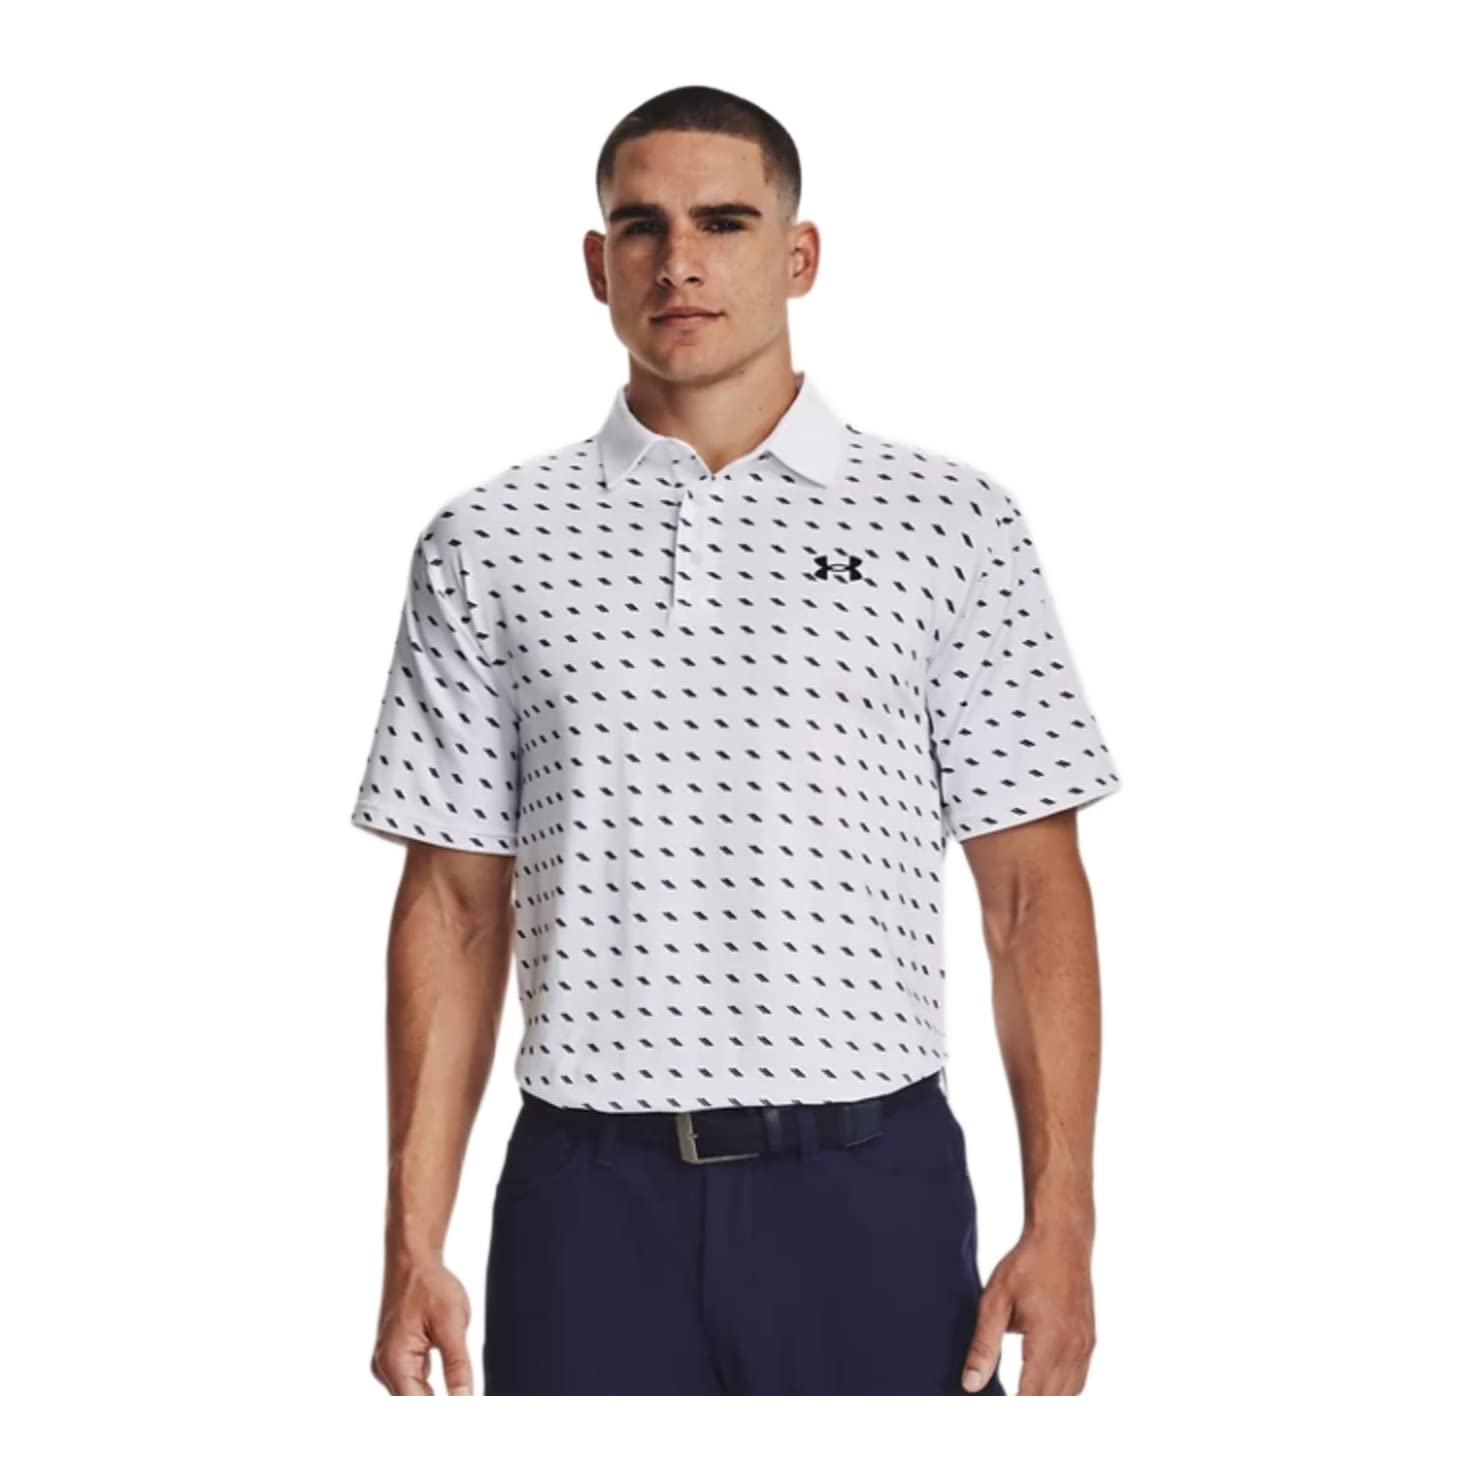 Under Armour Men's Playoff 2.0 Deuces Printed Polo Shirt